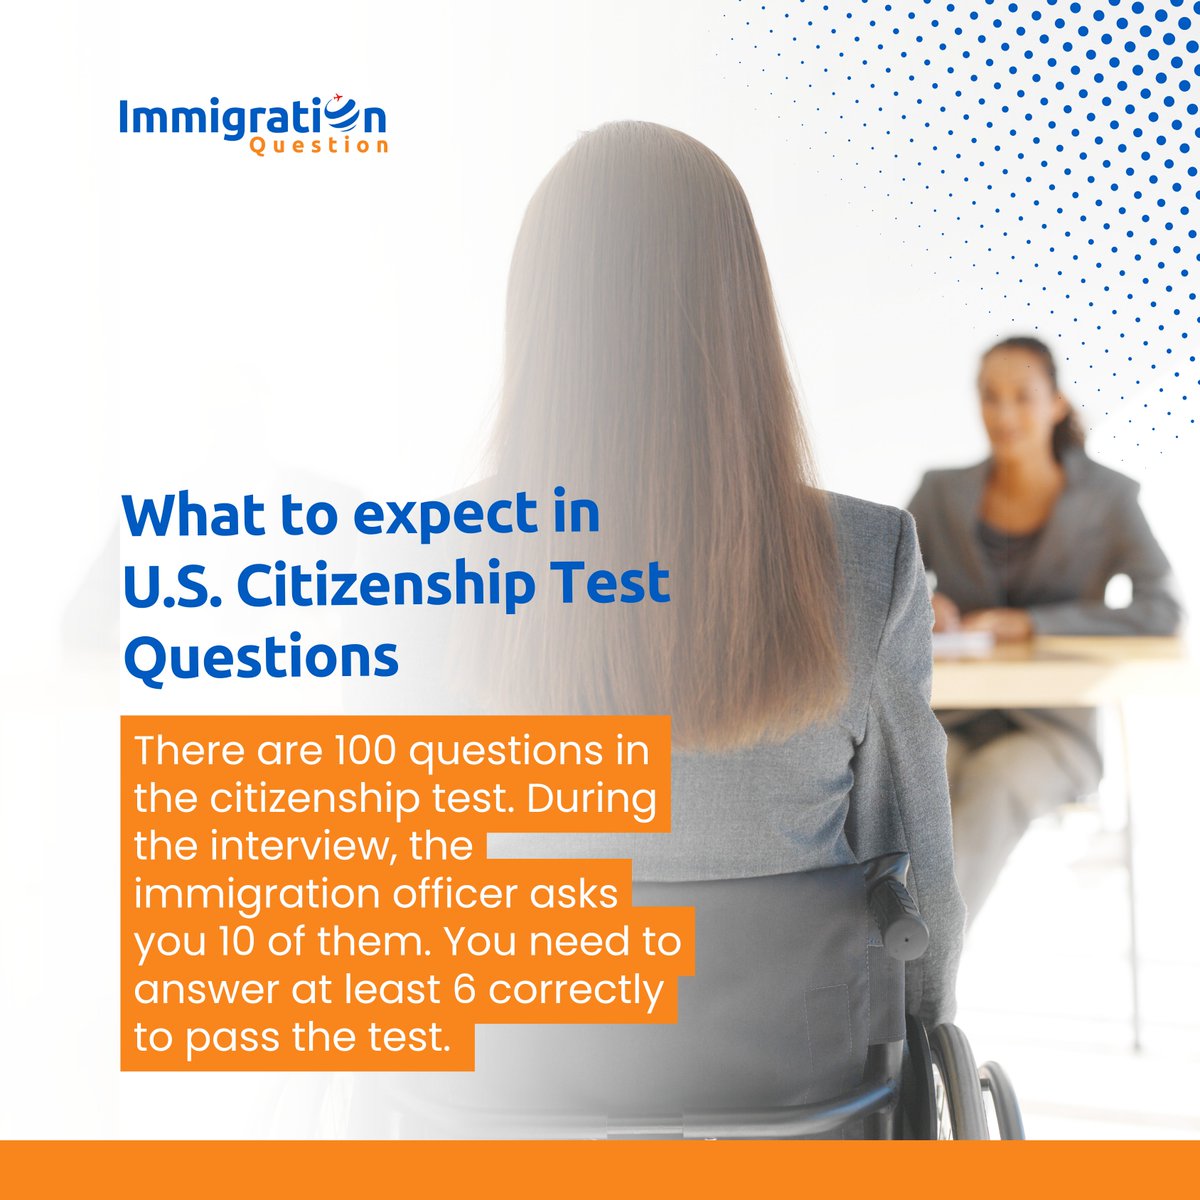 The U.S. citizenship test assesses what you know about American government, history, and geography. The exam happens during your citizenship interview and is spoken, not written.
#USCitizenshipTest #Naturalization #immigrants #GeographyQuiz #CitizenshipInterview #usImmigration